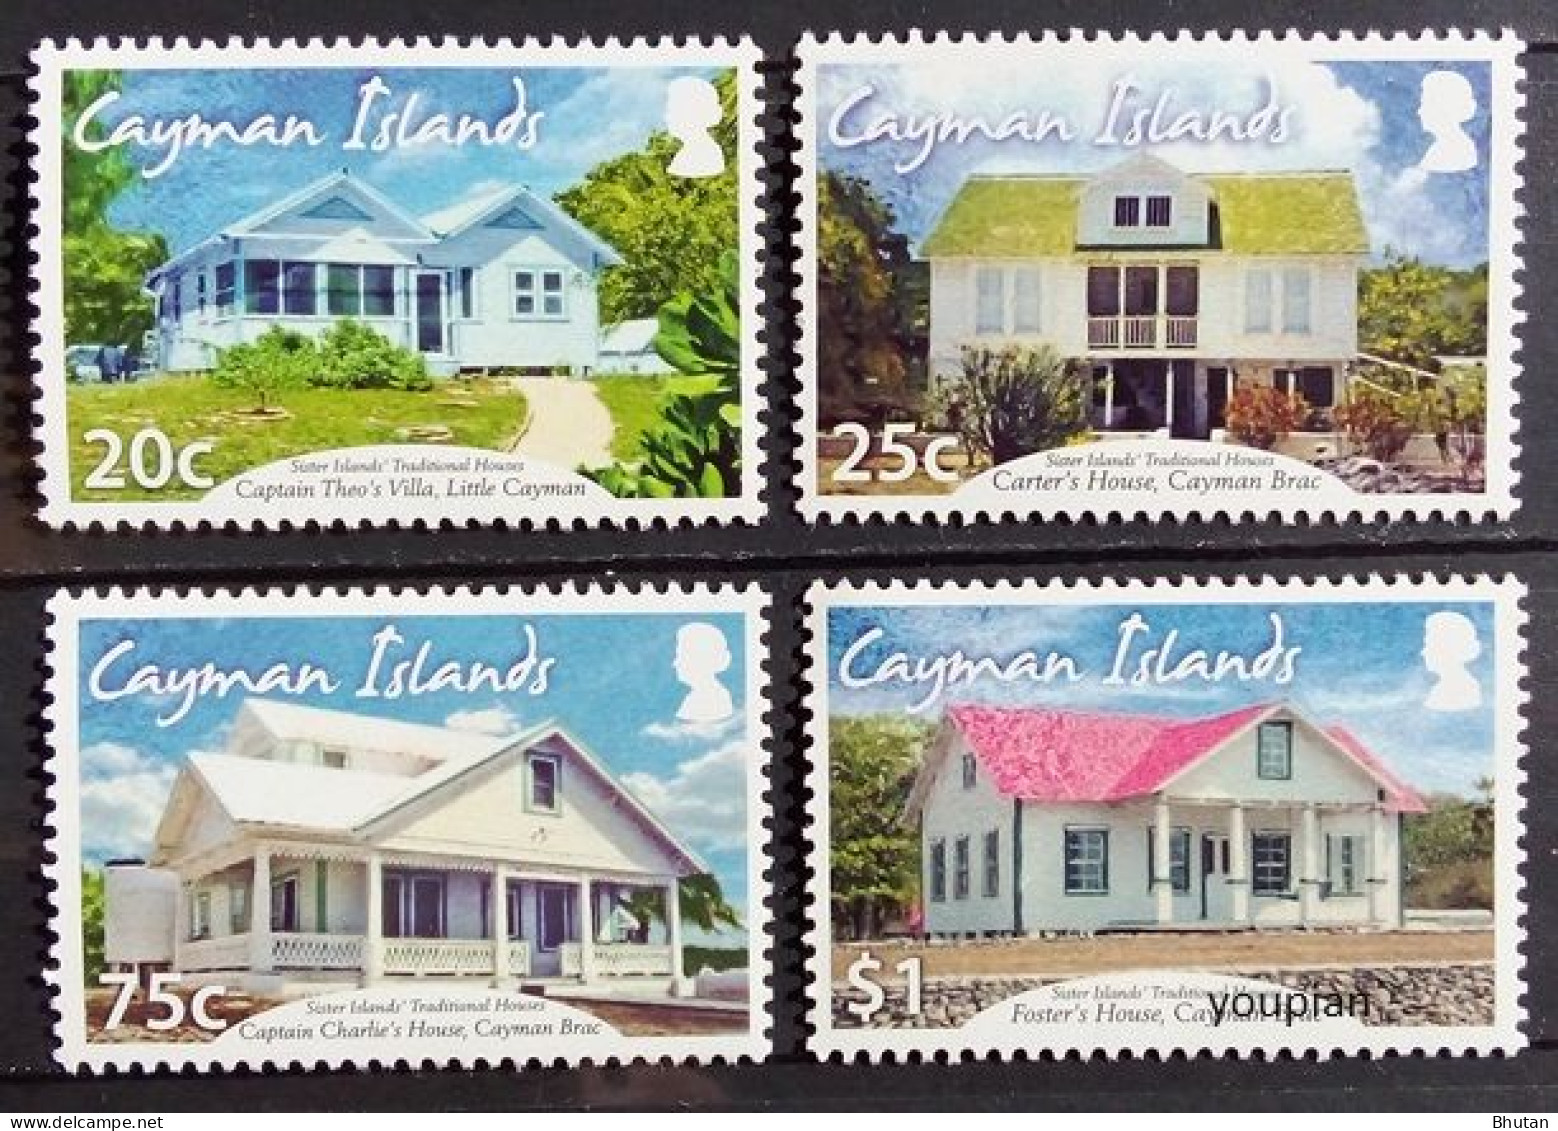 Cayman Islands 2014, Traditional Houses, MNH Stamps Set - Cayman Islands